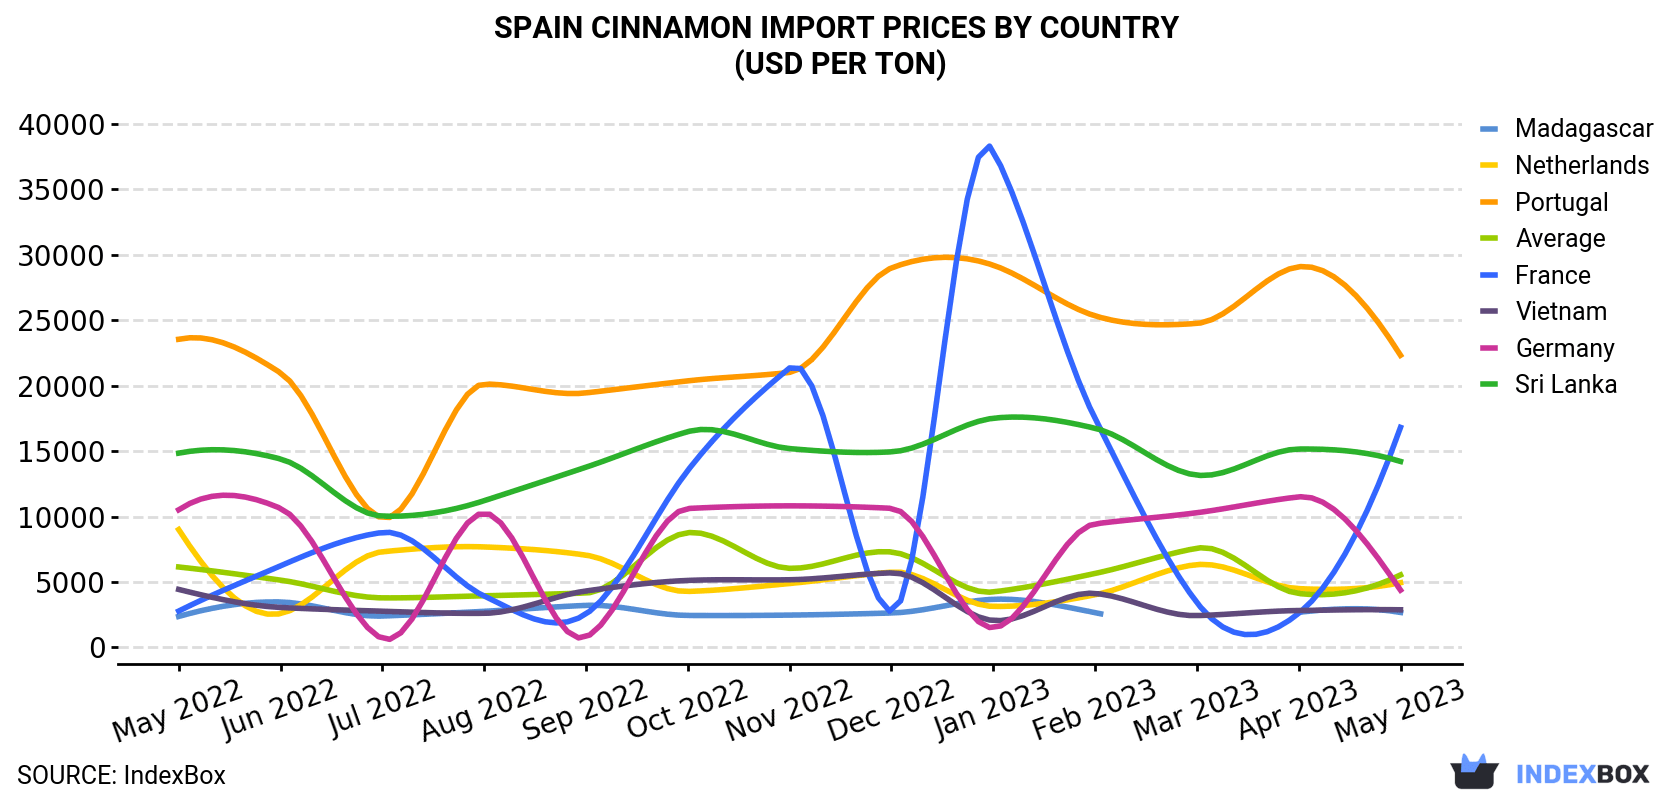 Spain Cinnamon Import Prices By Country (USD Per Ton)